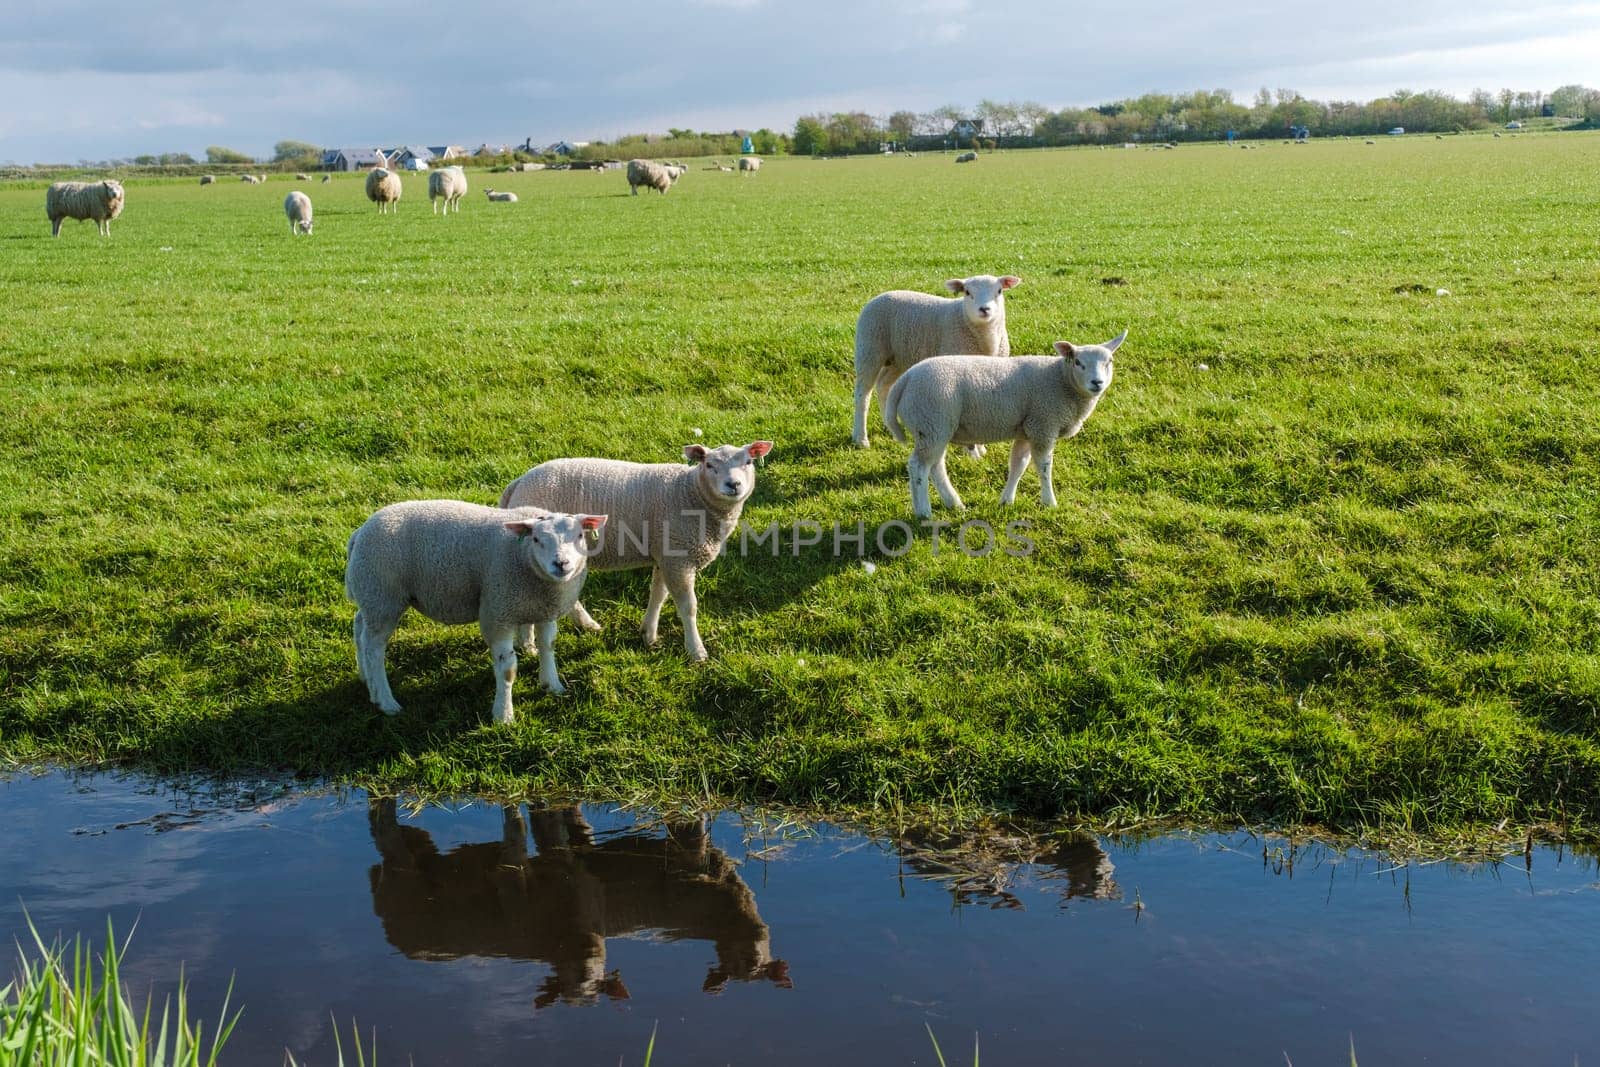 A group of sheep, with fluffy white wool and gentle faces, stand peacefully next to a clean pond in Texel, Netherlands.